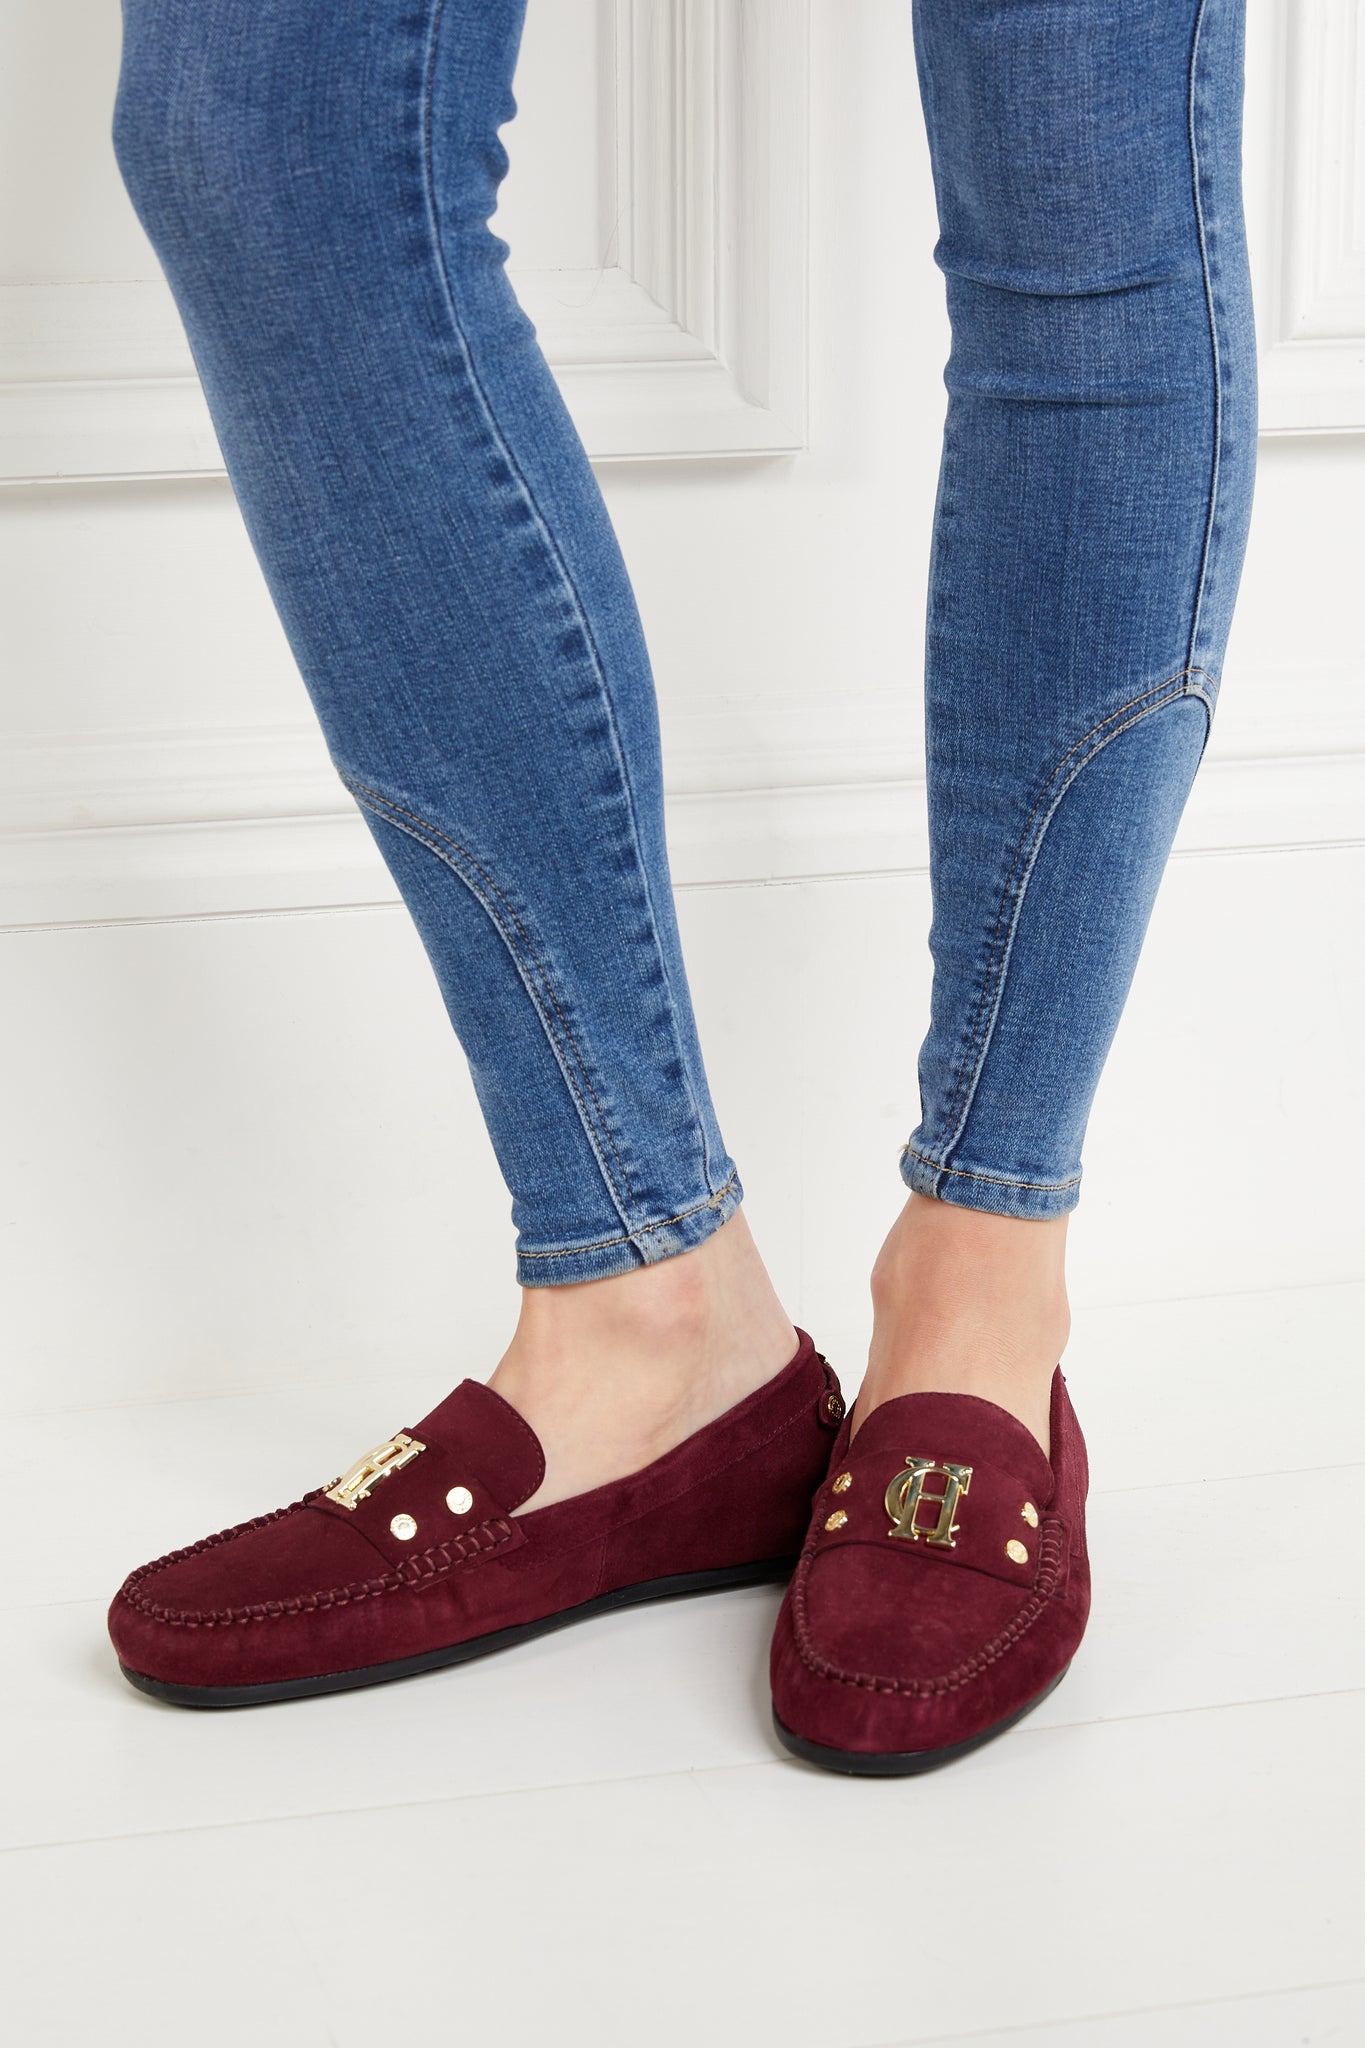 classic deep red suede loafers with a leather sole and top stitching details and gold hardware paired with skinny denim jeans